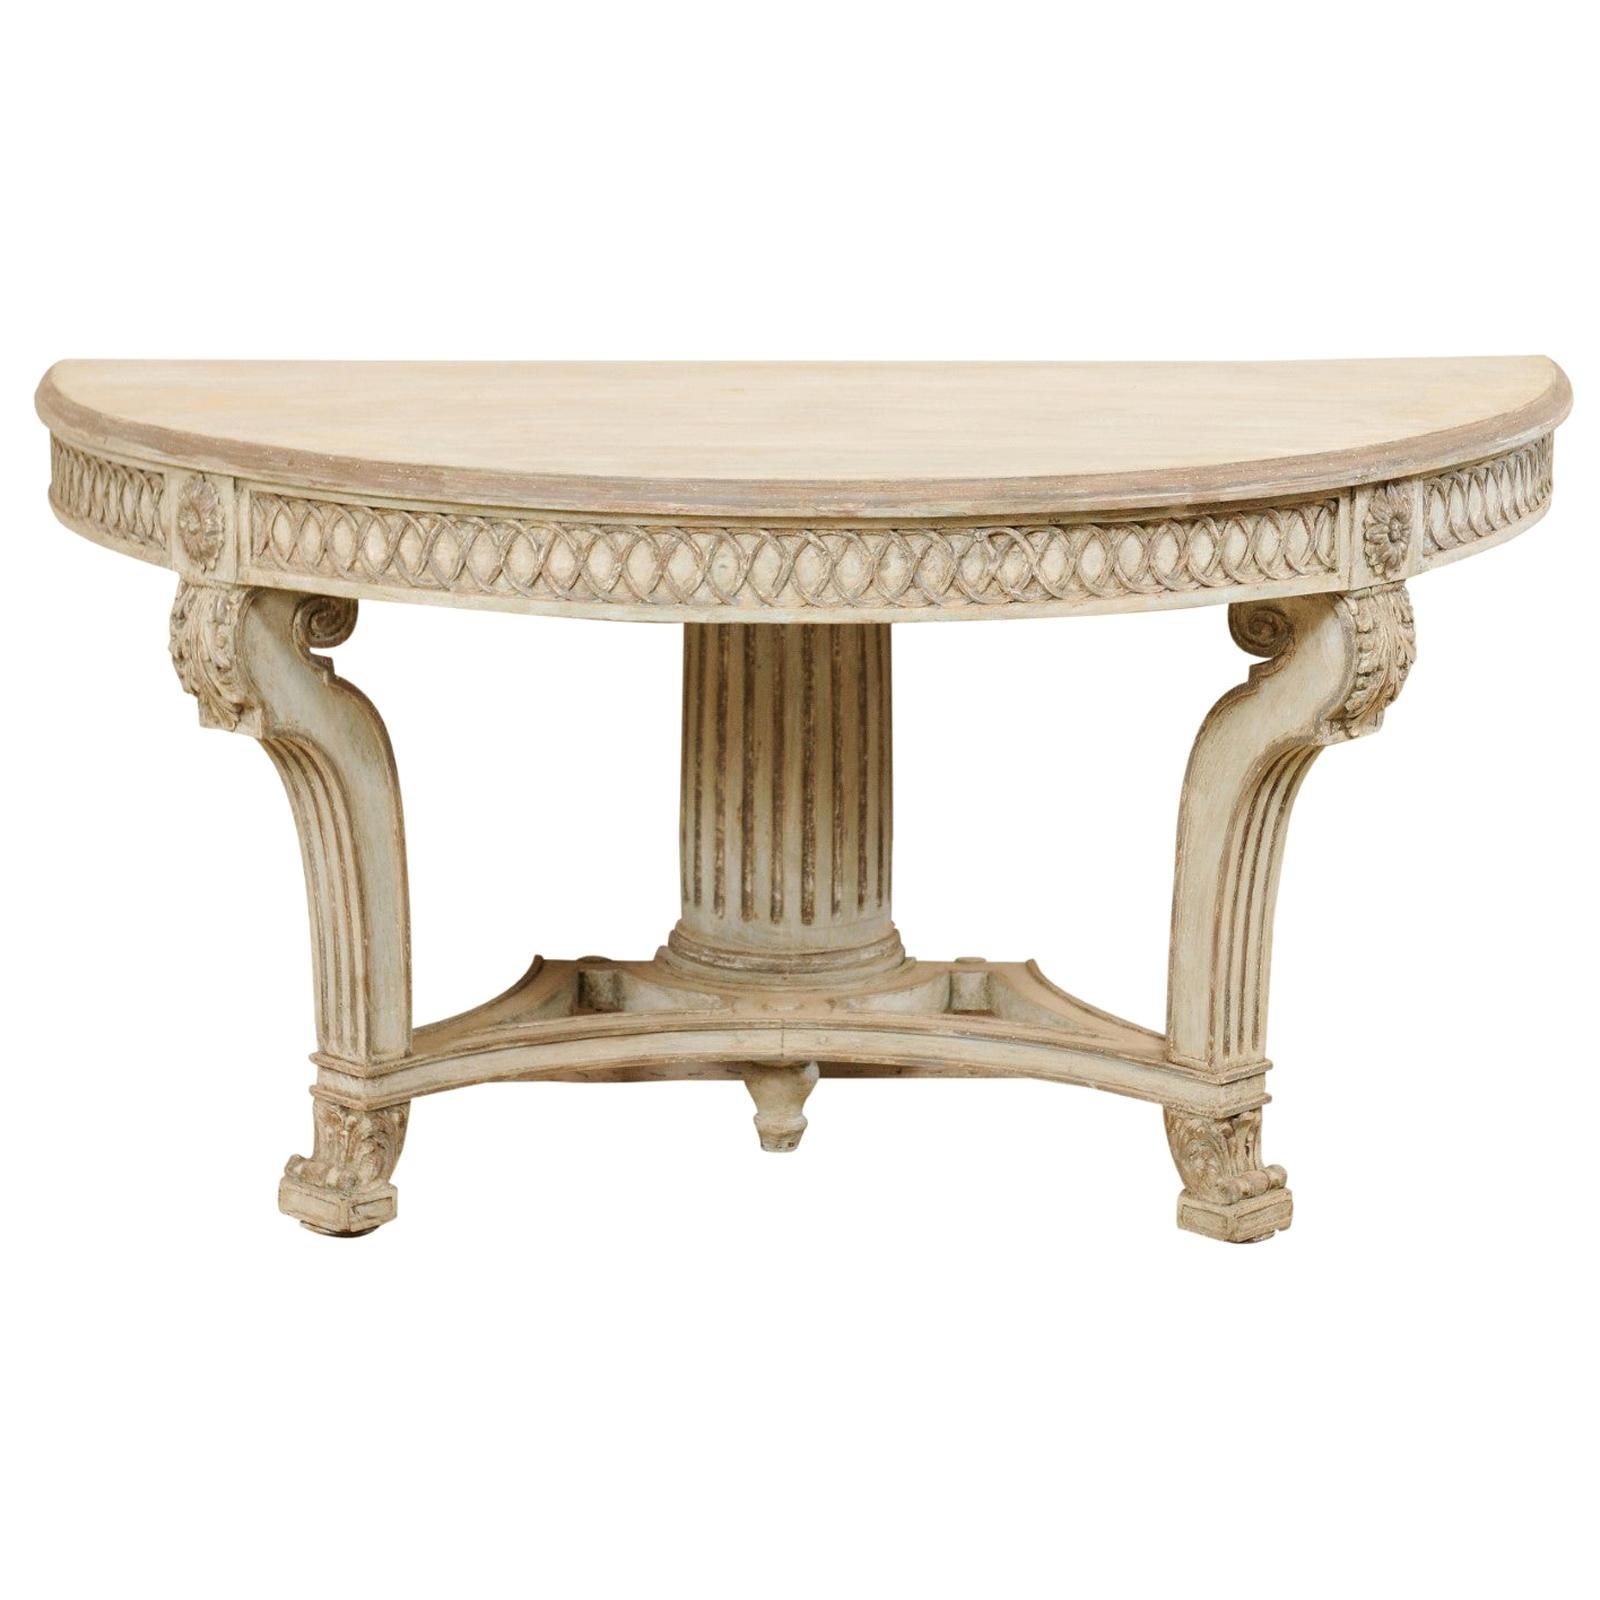 Italian Half-Round Nicely Carved Console Table from the Mid-20th Century